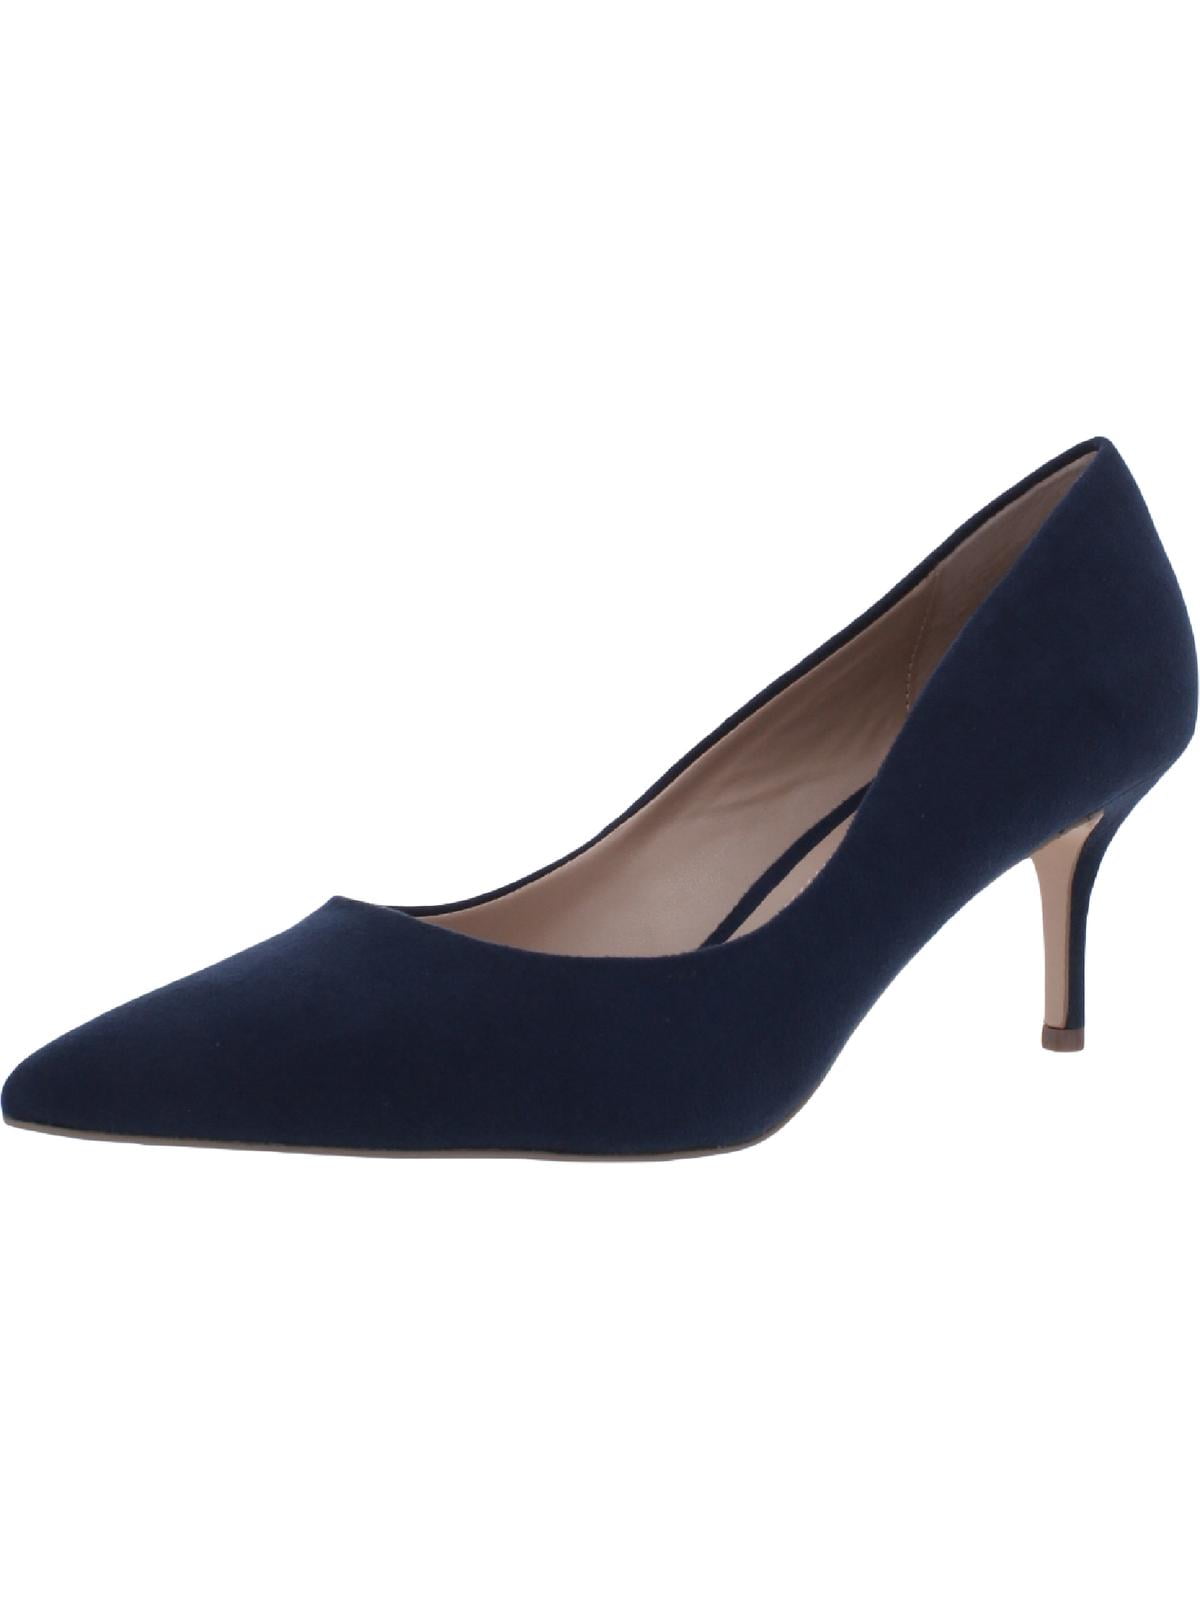 Charles Amelia Women's Faux Pointed Toe Pumps Navy Size 9 - Walmart.com